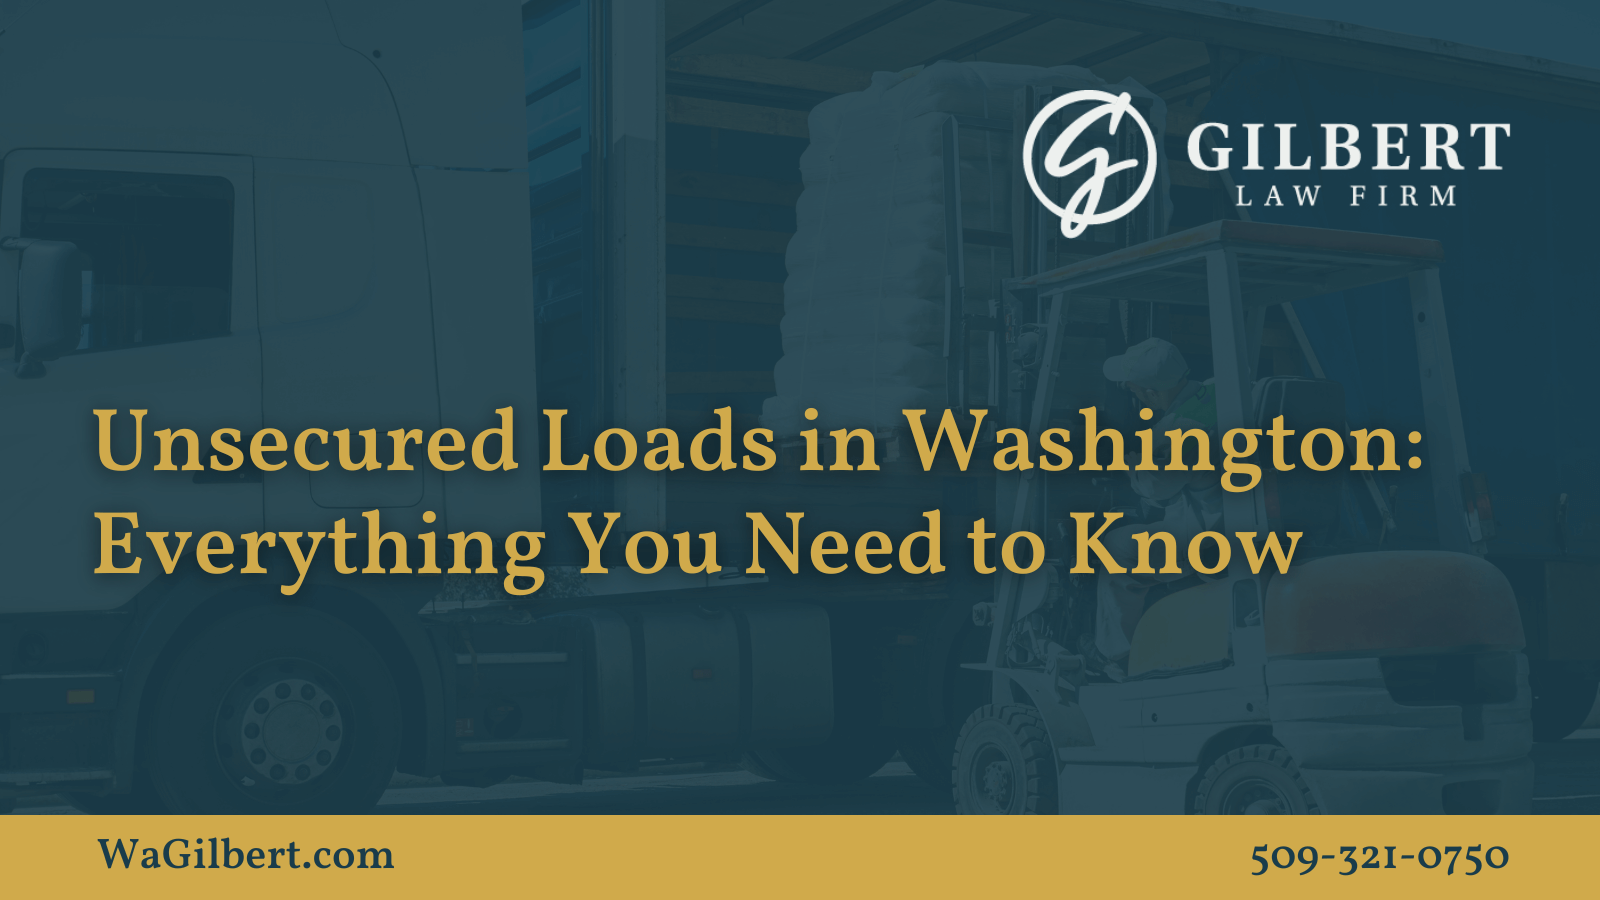 Unsecured Loads in Washington: Everything You Need to Know | Gilbert Law Firm Spokane Washington